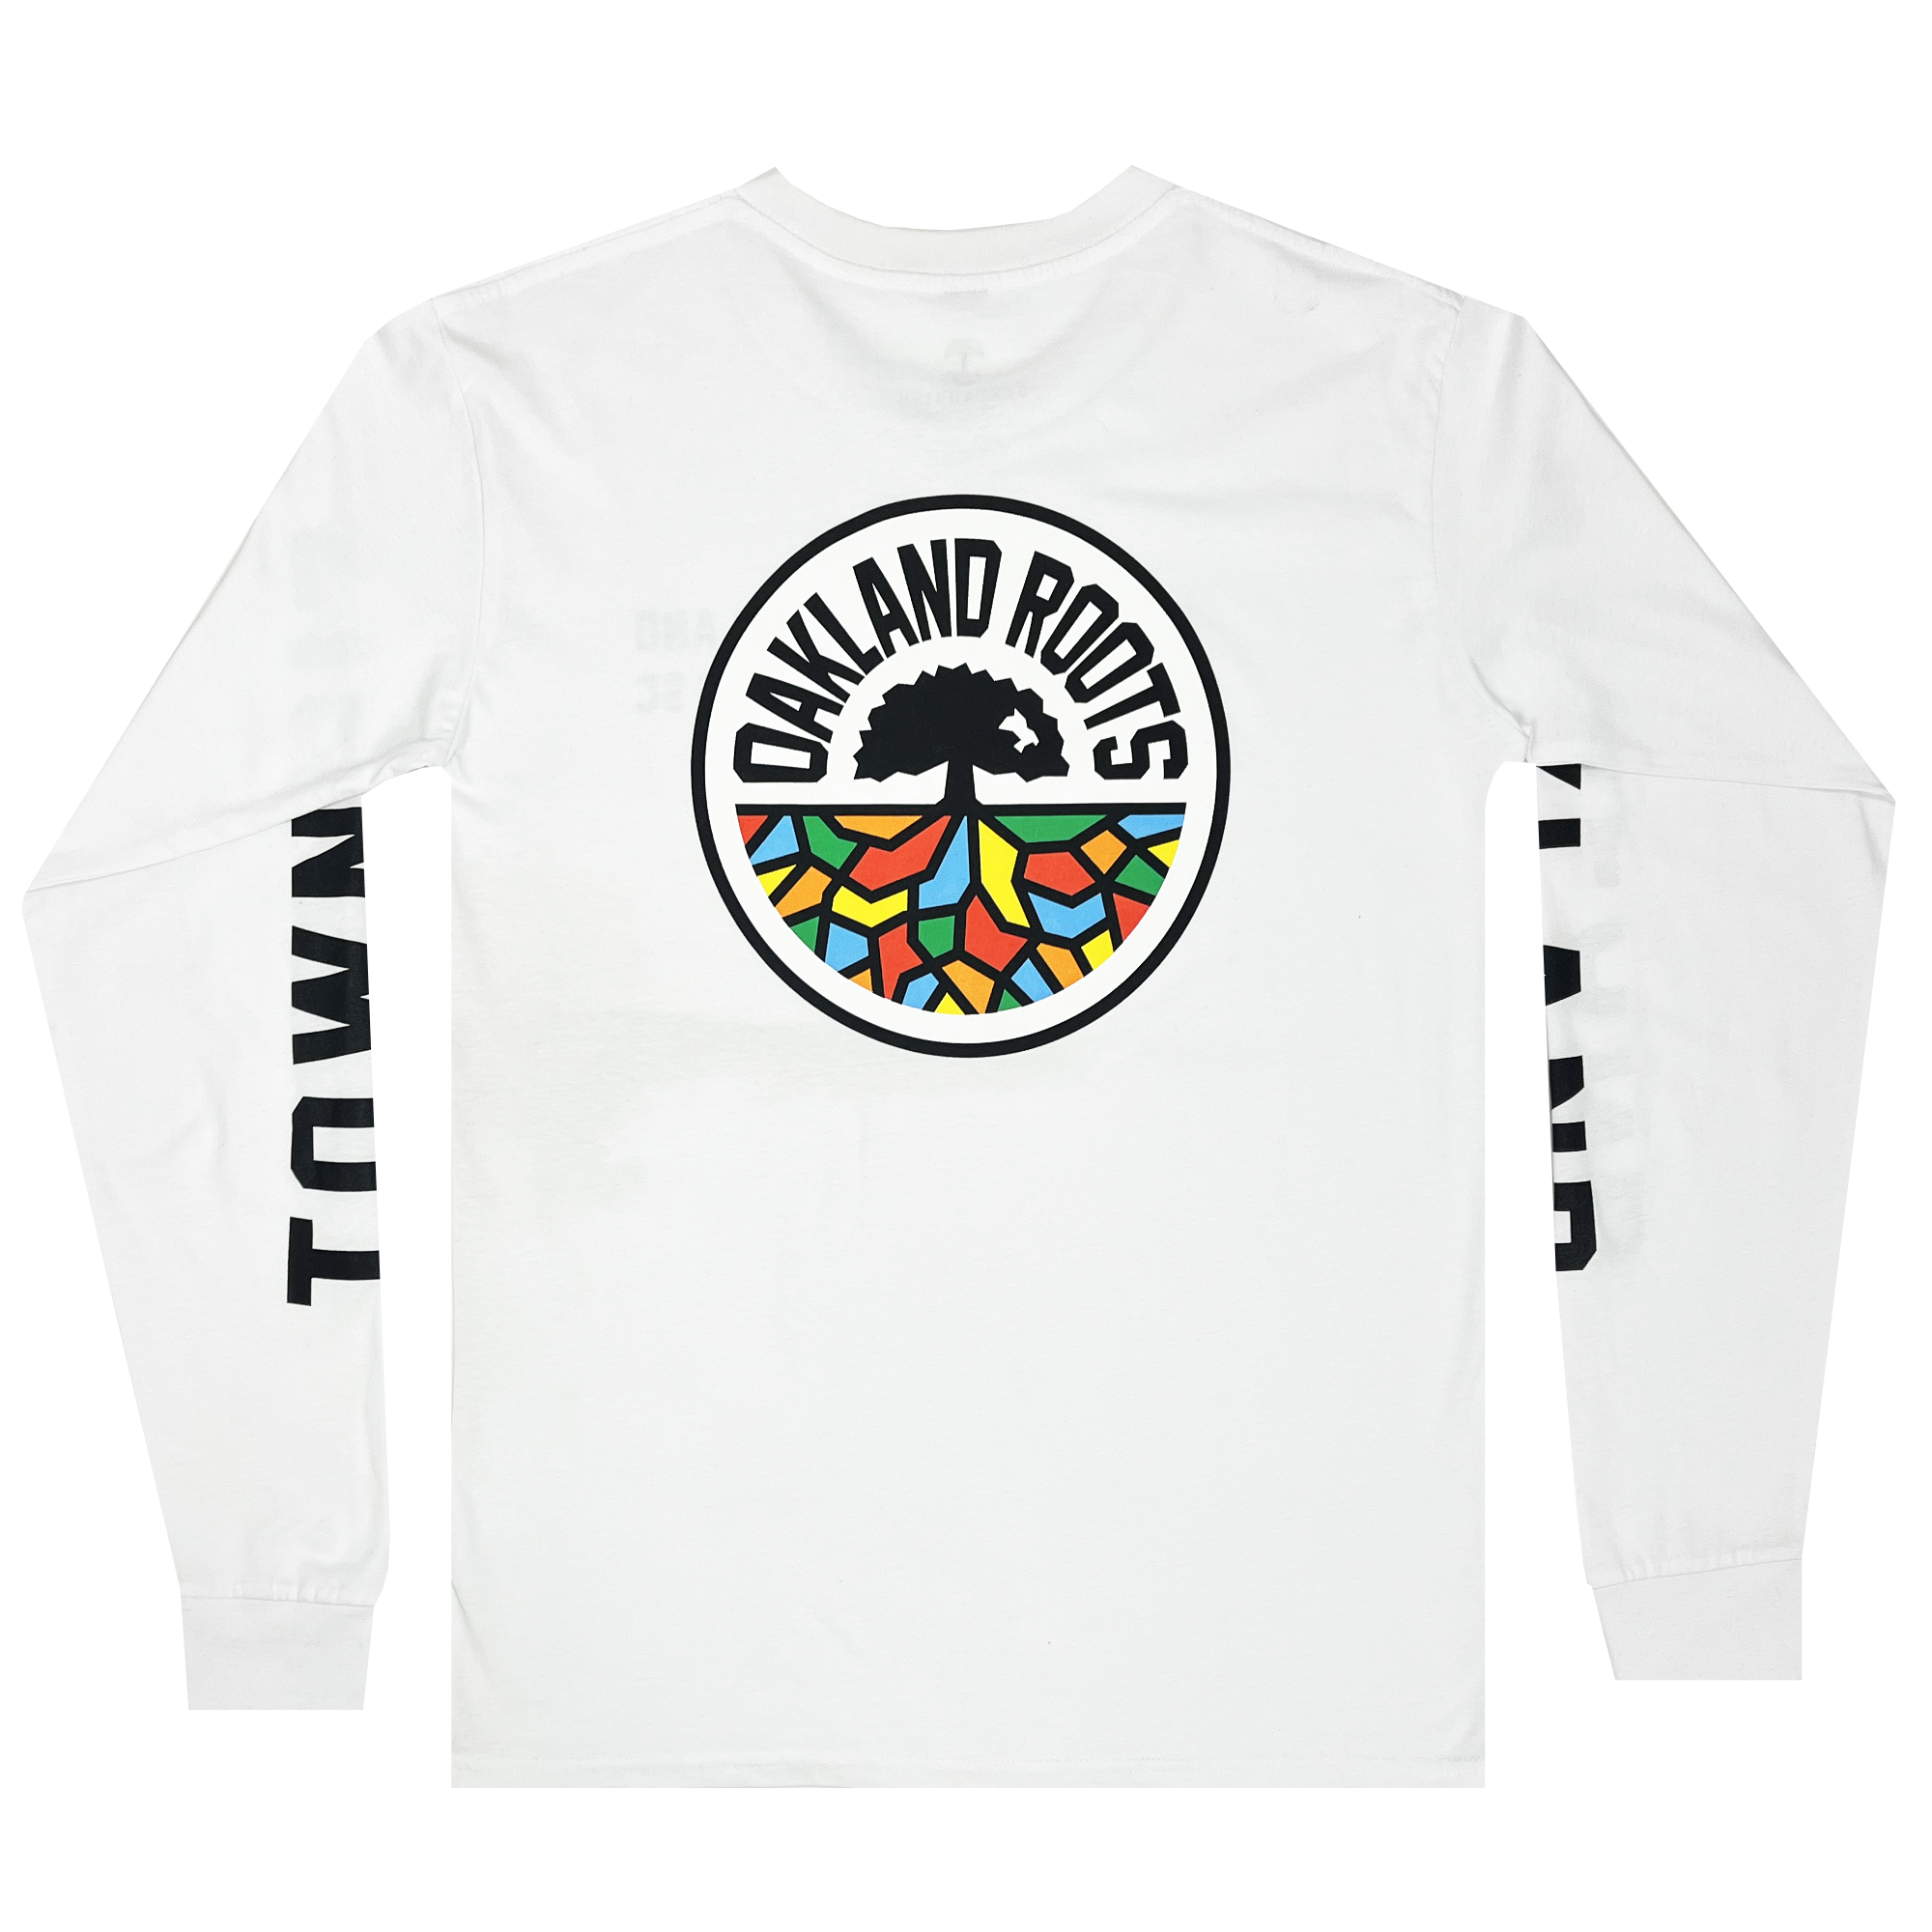 Back view of white long-sleeve shirt with a large round multi-color Oakland Roots SC logo.